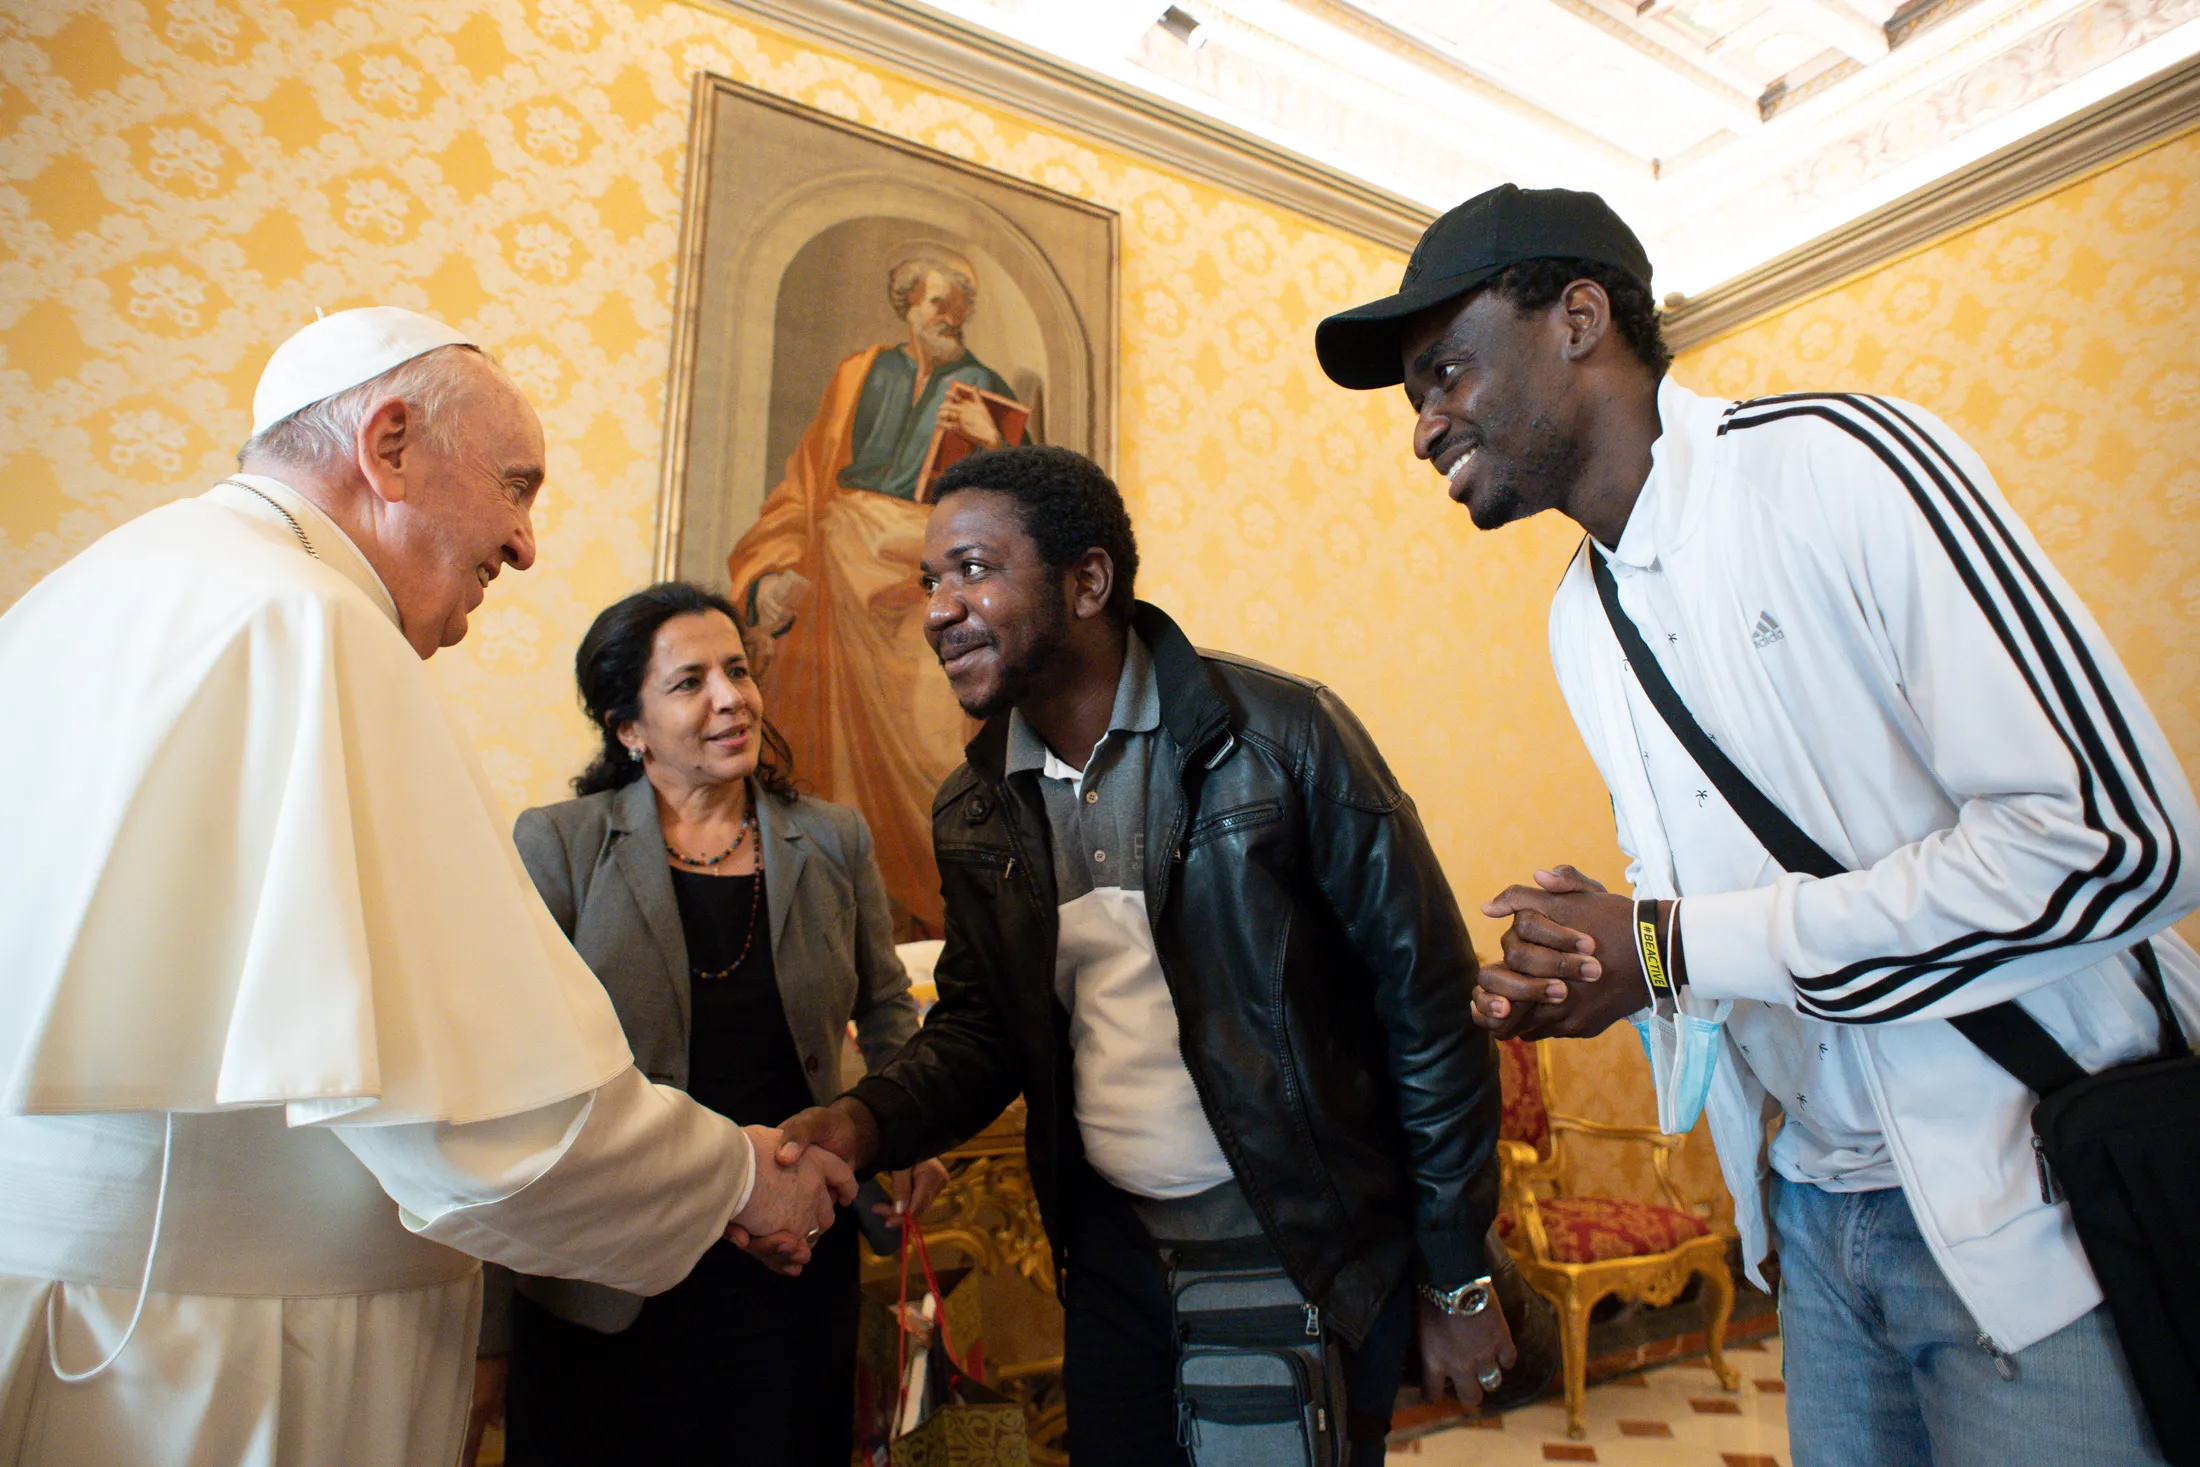 Pope Francis meets with refugees whom he helped to bring to Italy on his 85th birthday, Dec. 17, 2021.?w=200&h=150